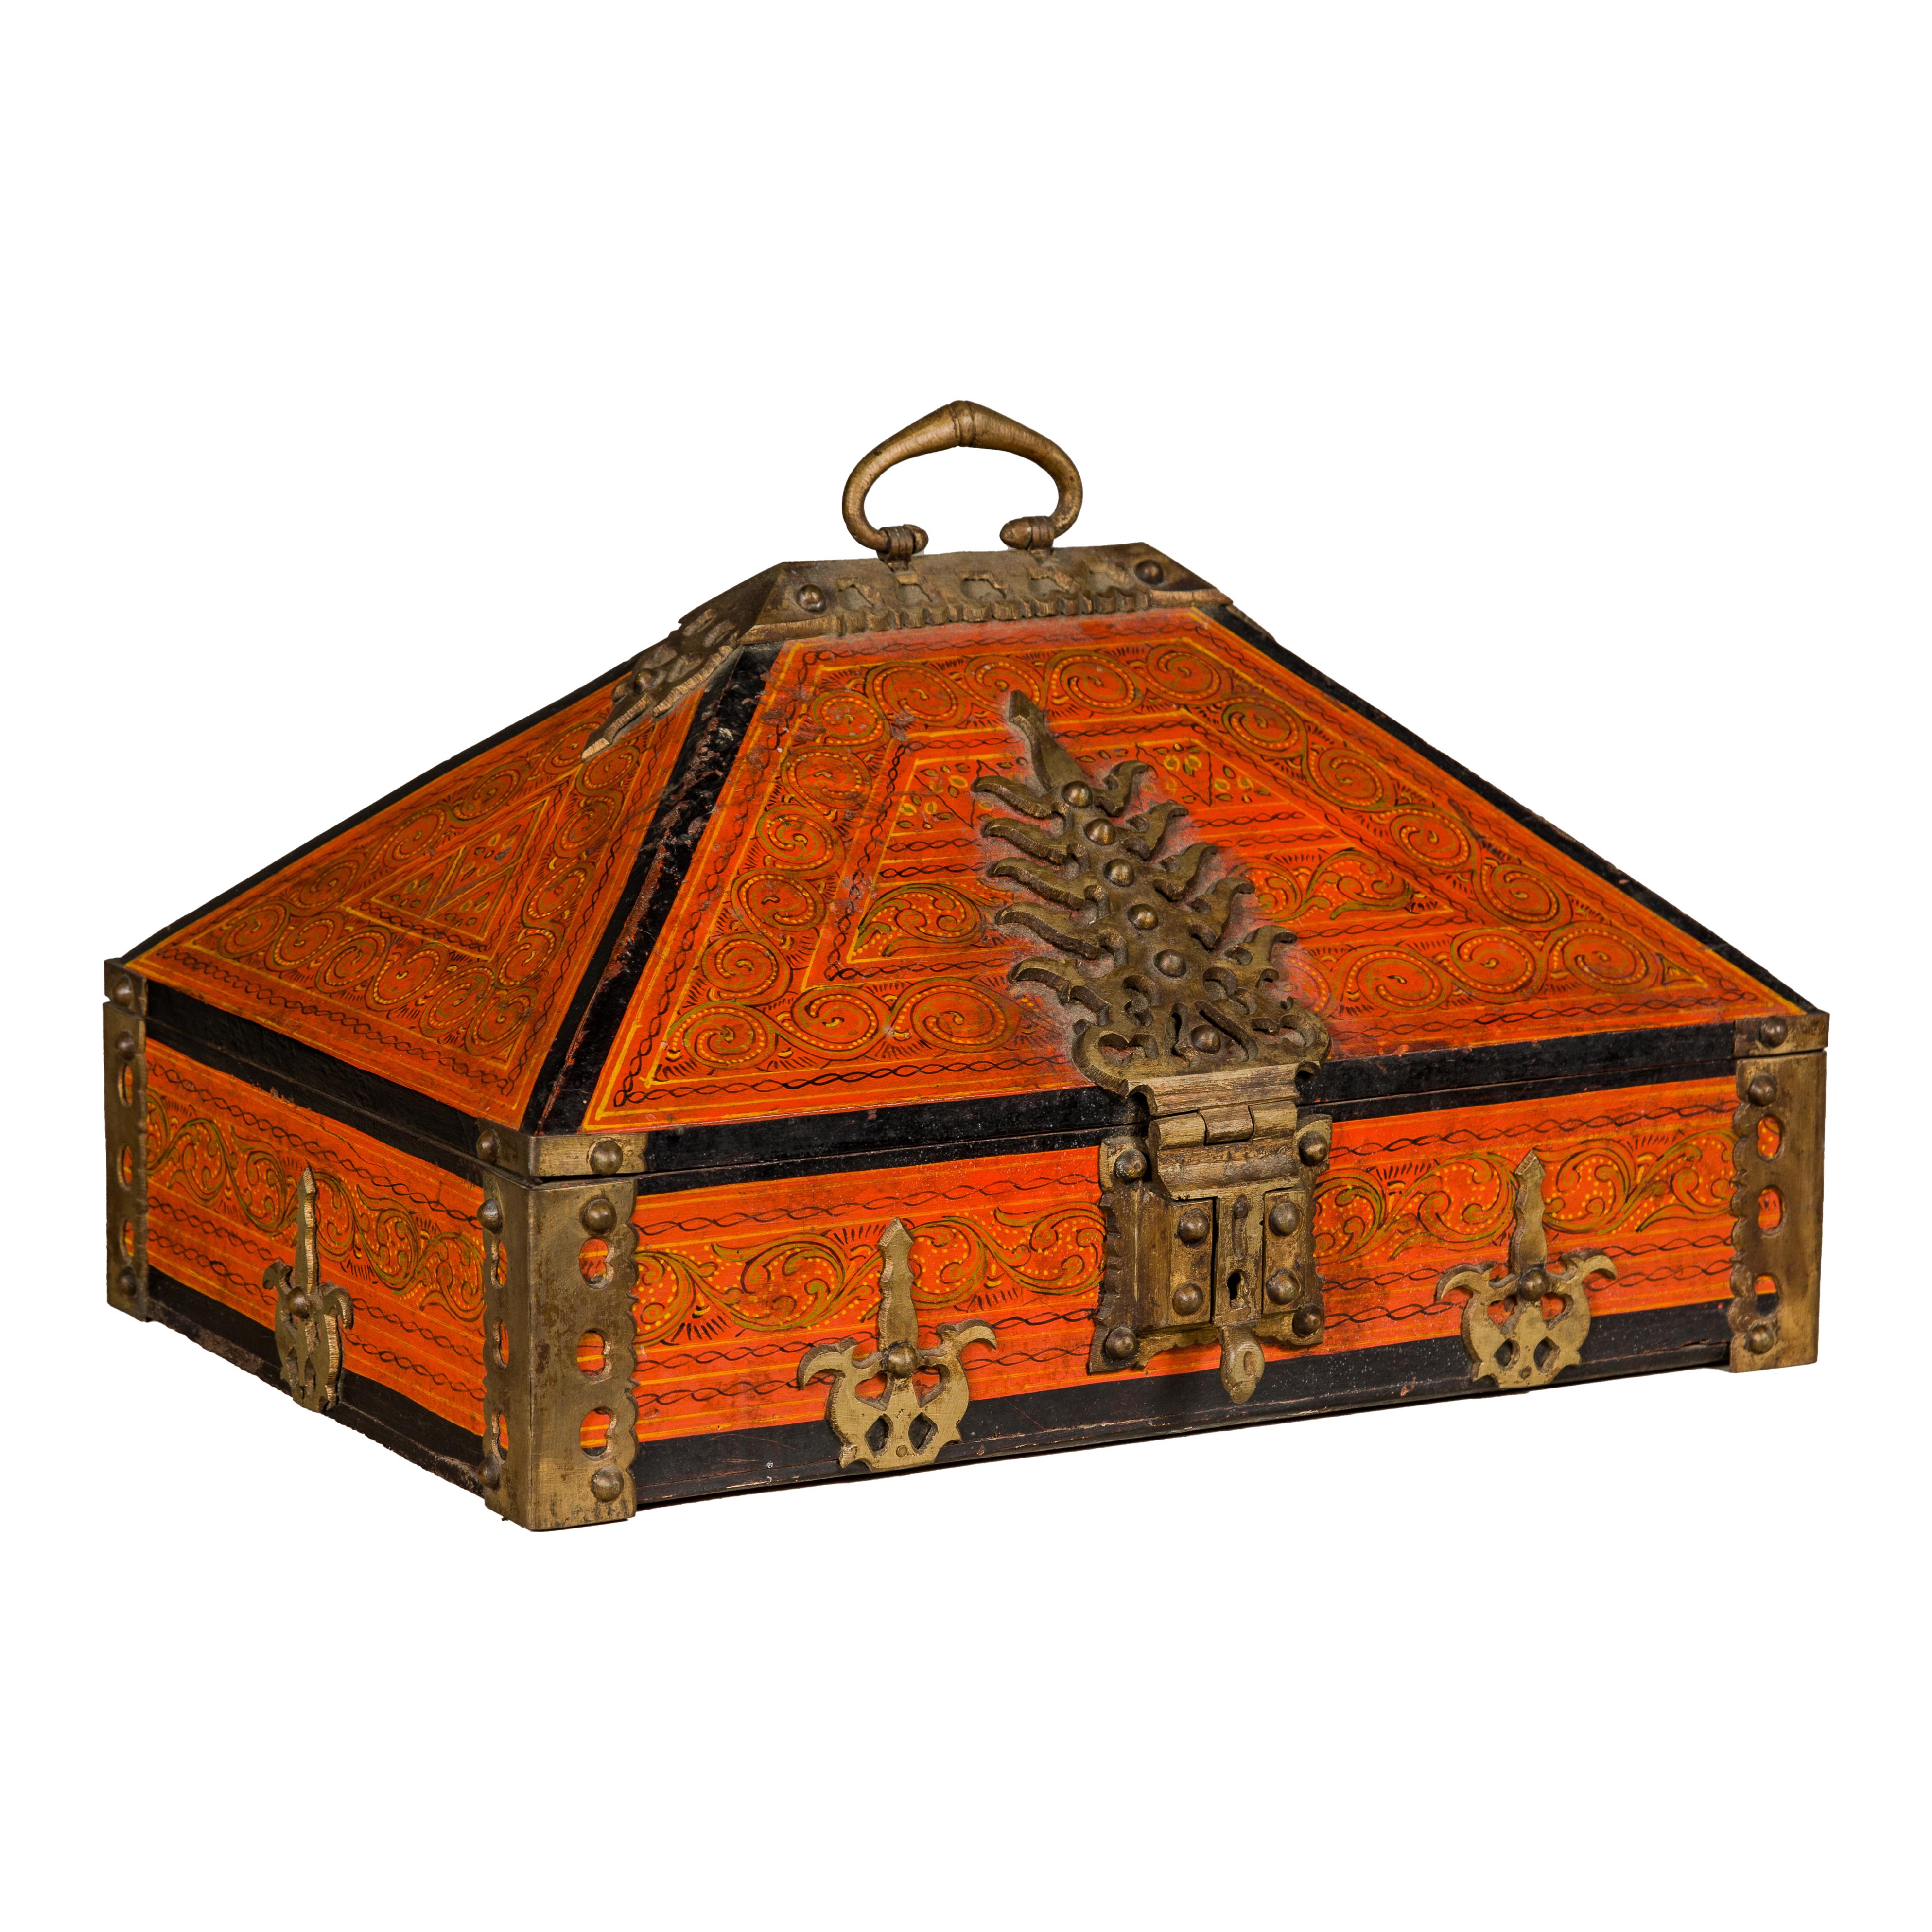 19th Century Malabar Jewelry Box Lacquered with Ornate Brass Accents from Kerala For Sale 11